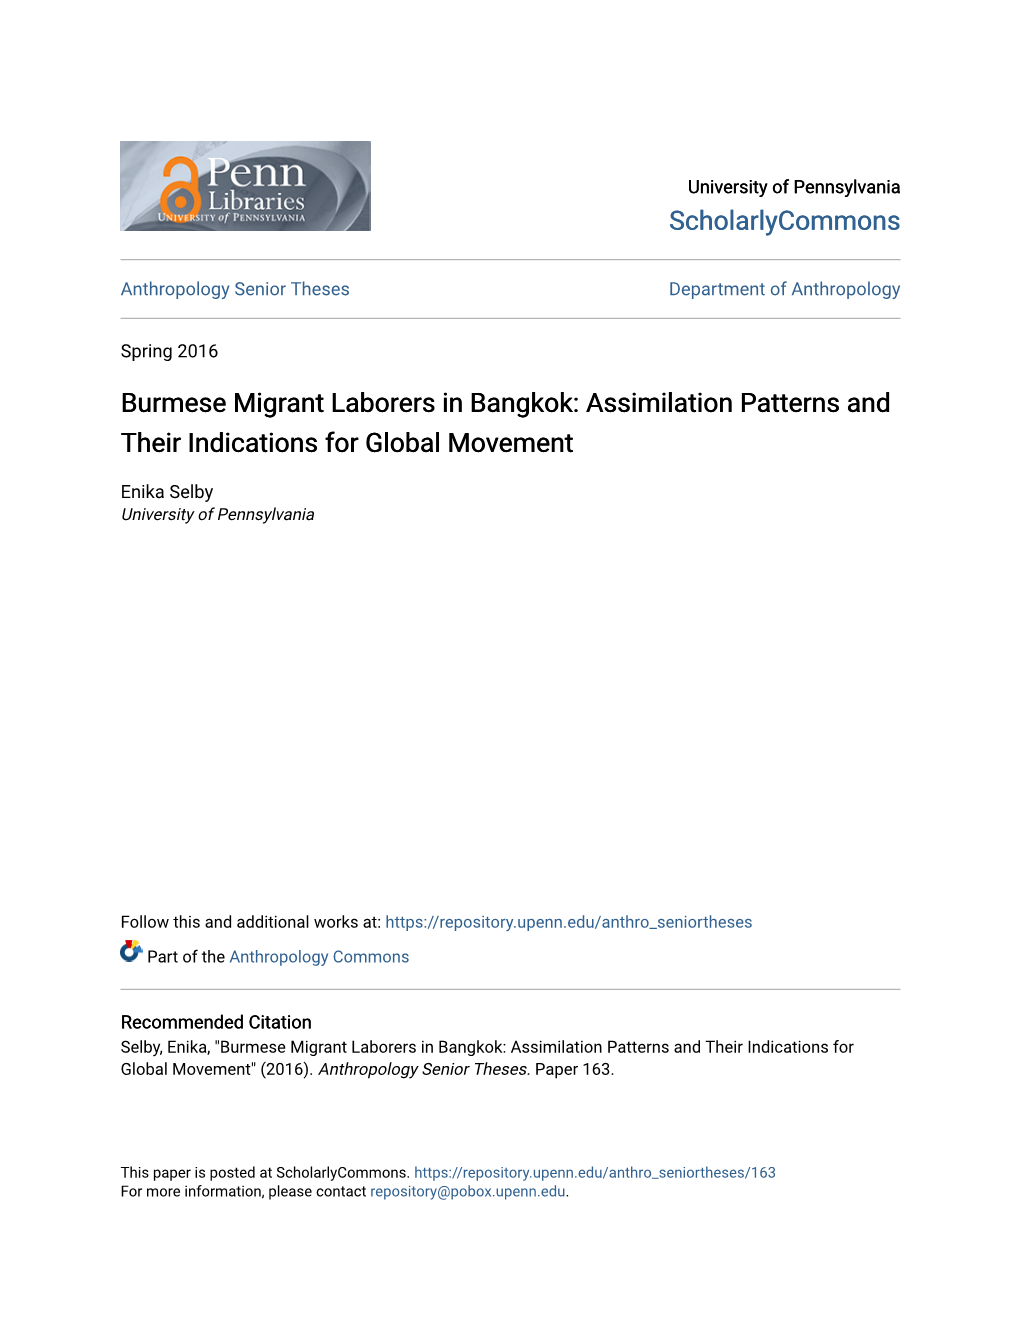 Burmese Migrant Laborers in Bangkok: Assimilation Patterns and Their Indications for Global Movement